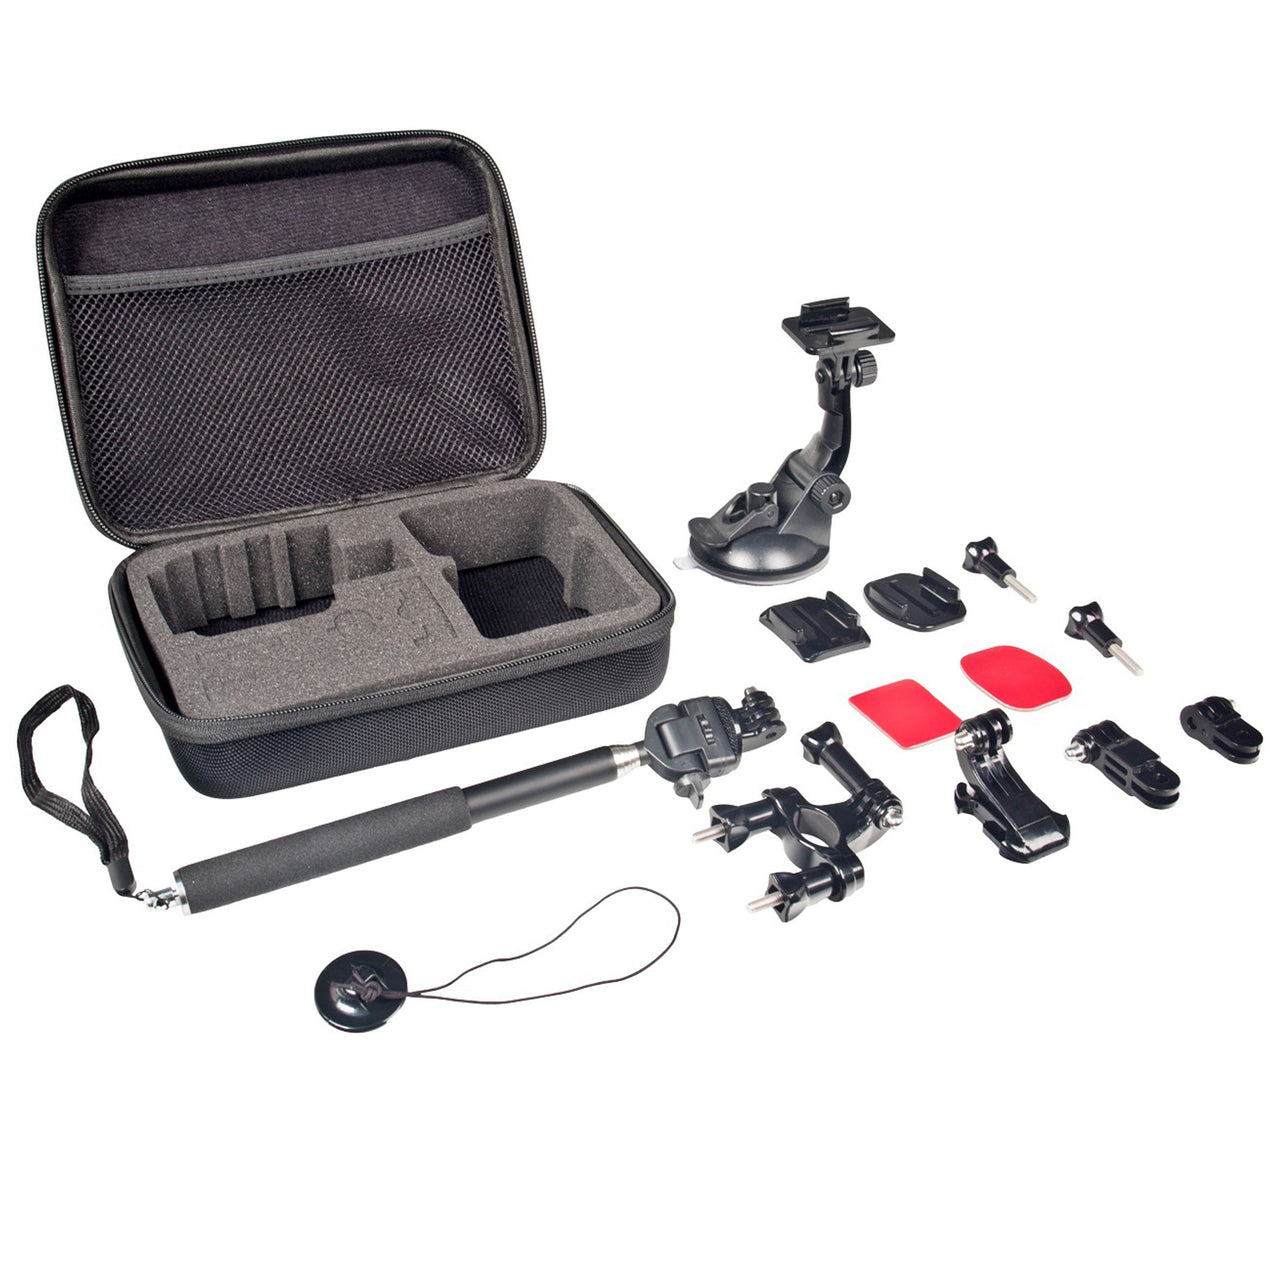 Xtreme Action Series 6-in-1 Sports Bundle Camcorder Accessory Kit for GoPro